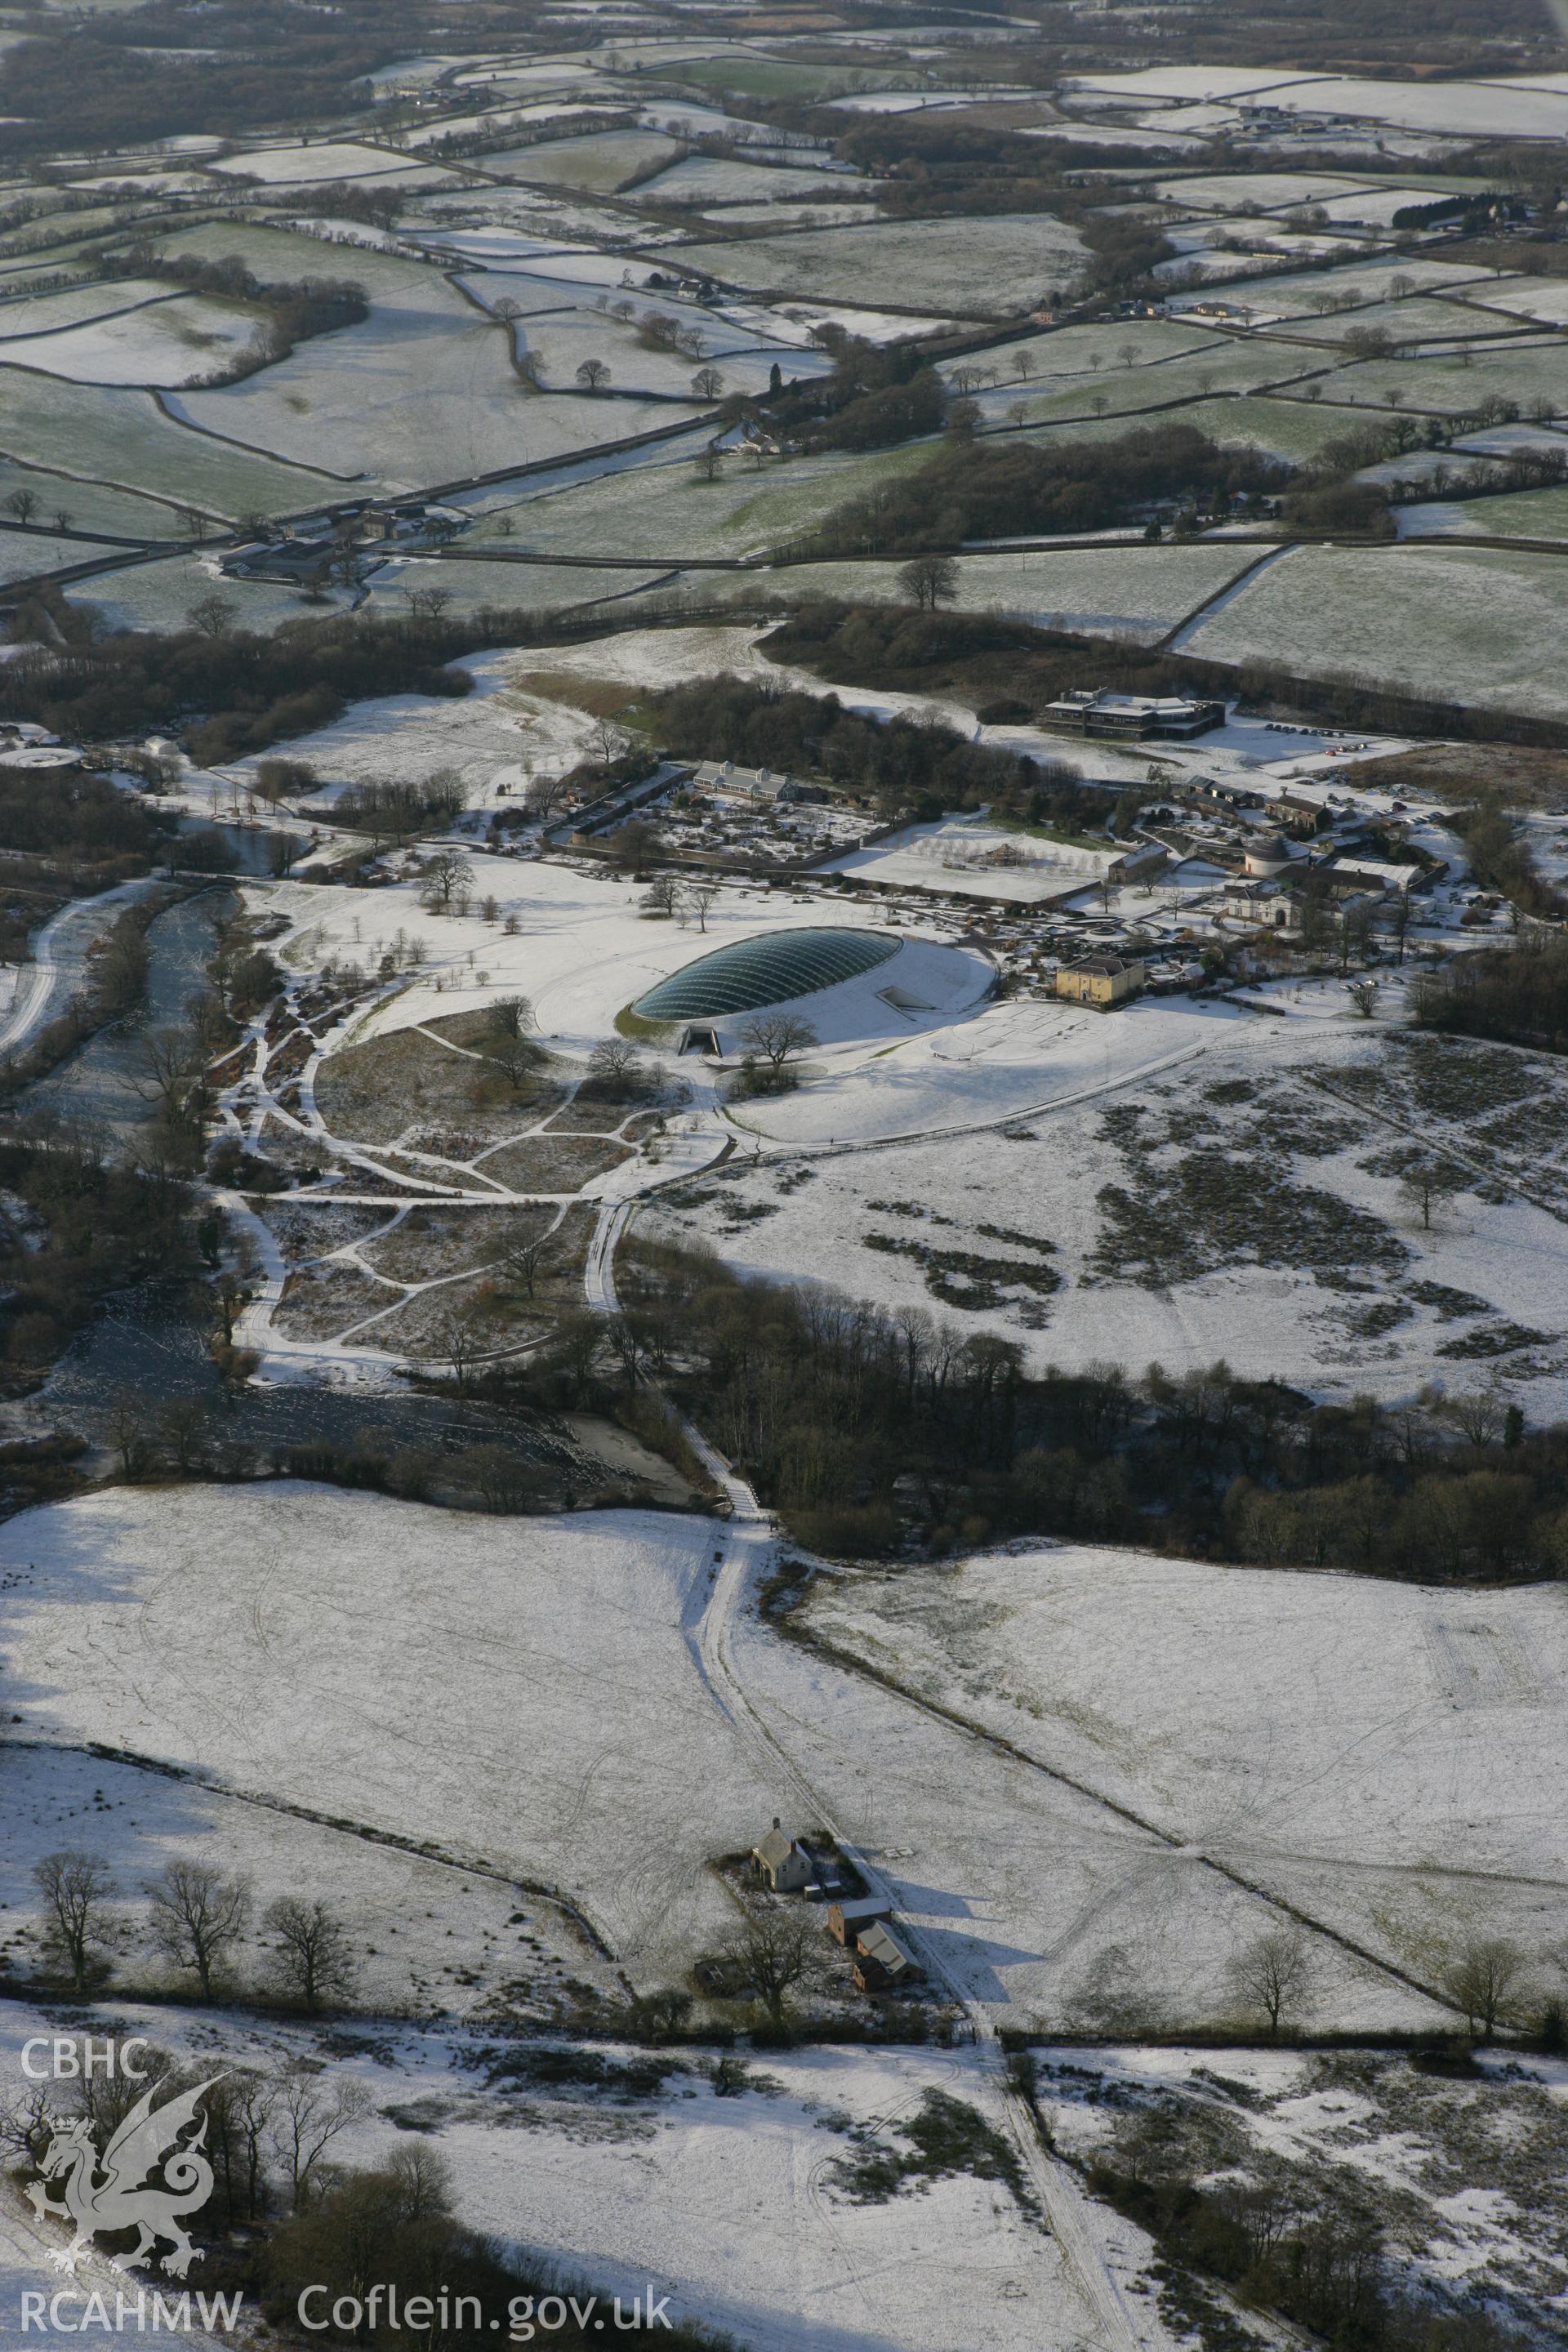 RCAHMW colour oblique photograph of the National Botanic Garden of Wales, winter landscape from the east. Taken by Toby Driver on 01/12/2010.